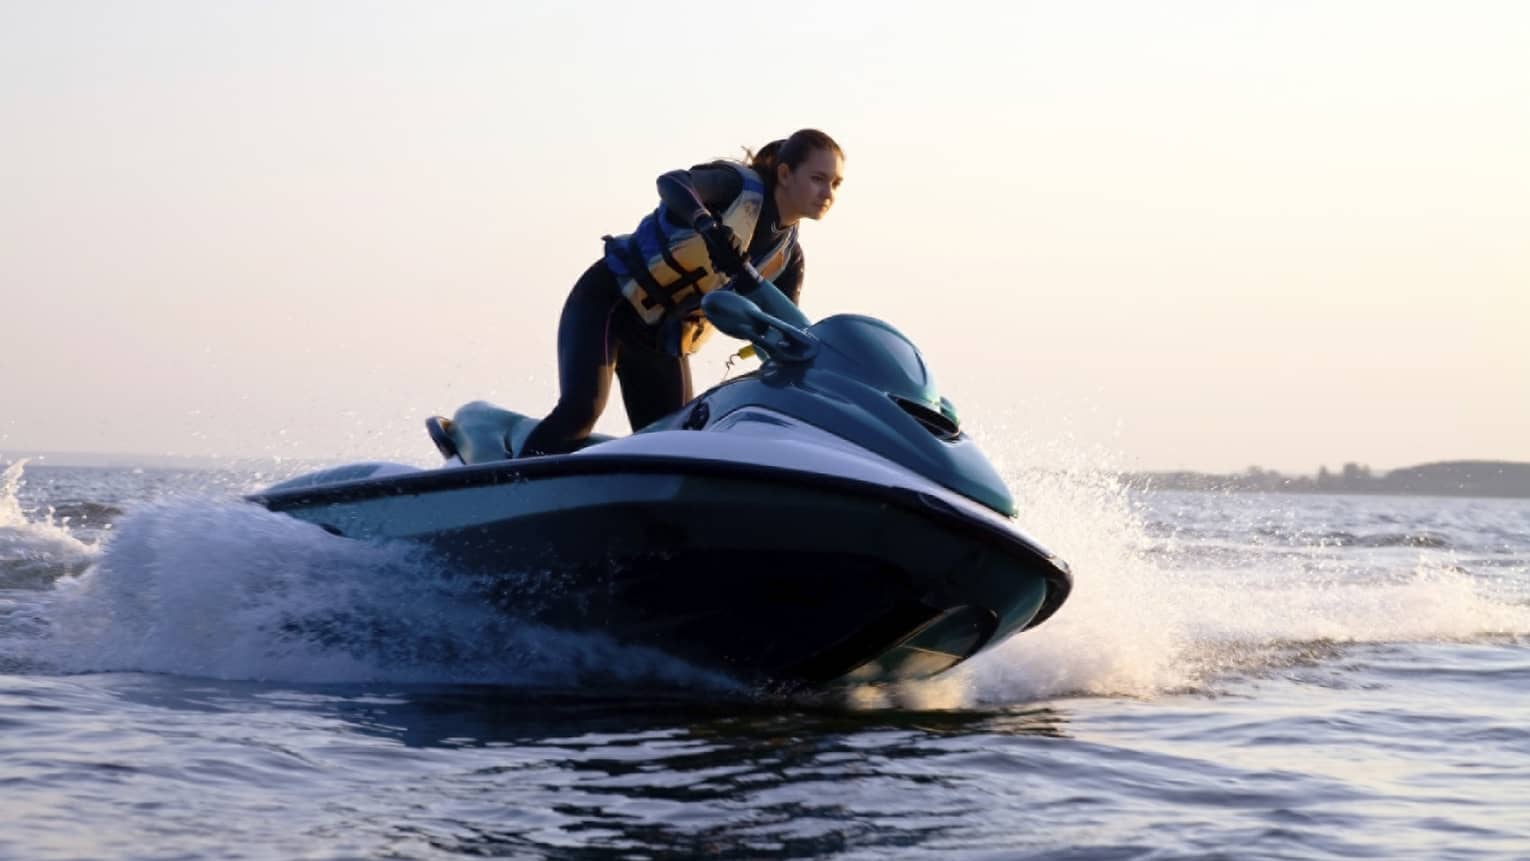 Woman wearing life jacket stands, steers jet ski on ocean at sunset